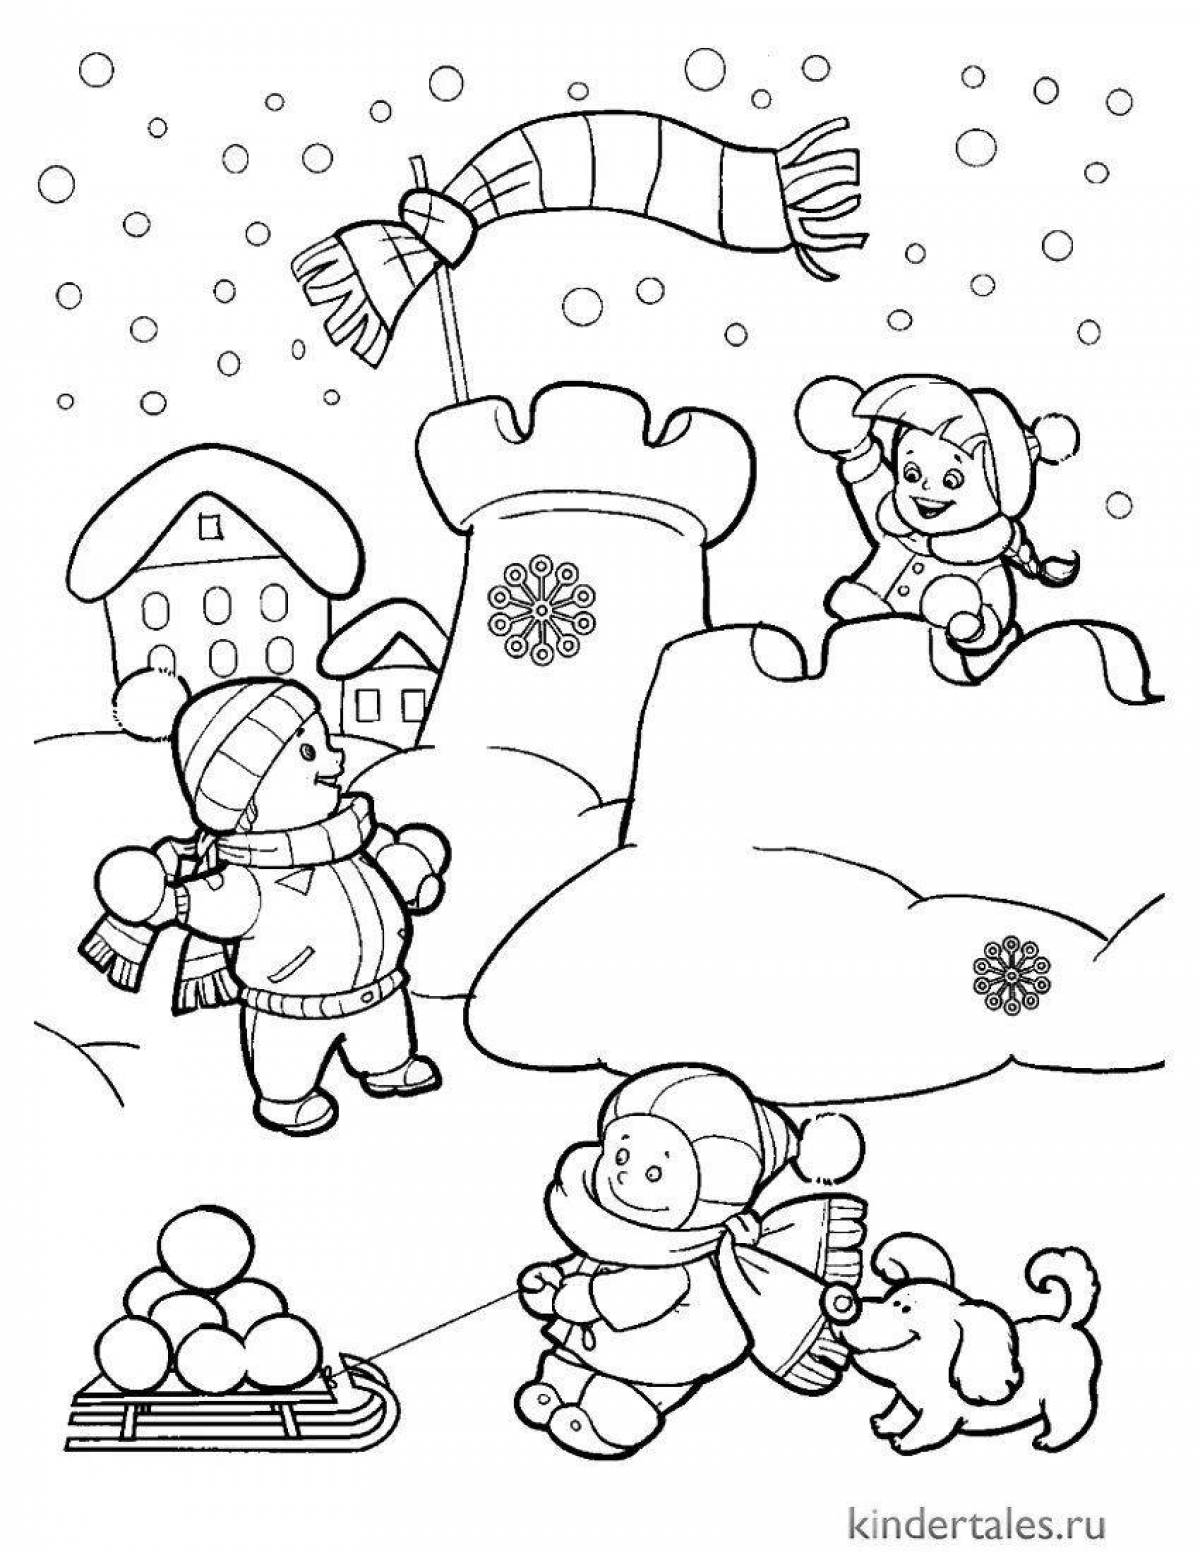 Exciting winter coloring book